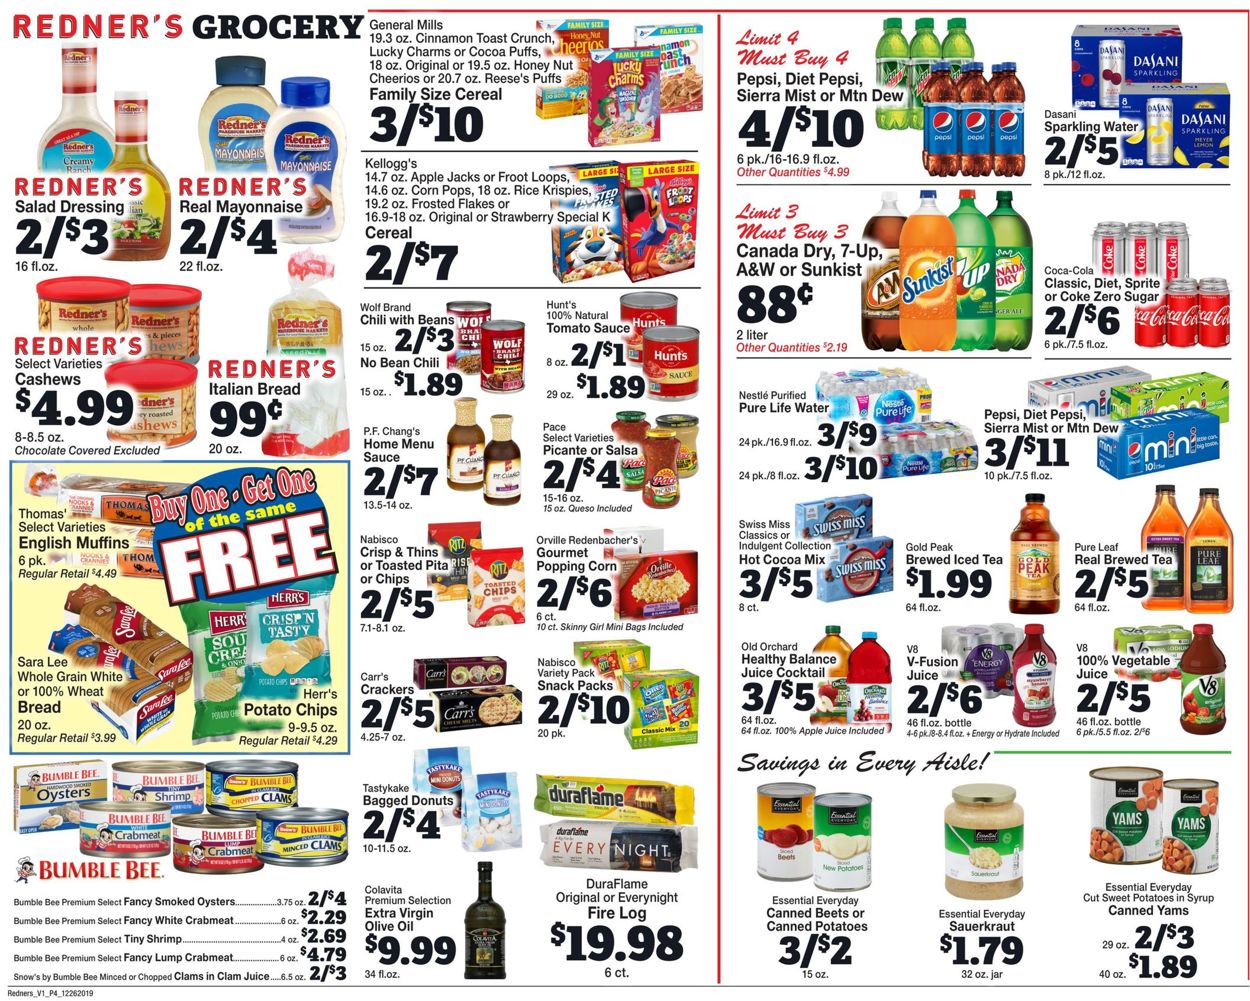 Redner’s Warehouse Market - New Year's Ad 2019/2020 Weekly Ad Circular - valid 12/26-01/01/2020 (Page 6)